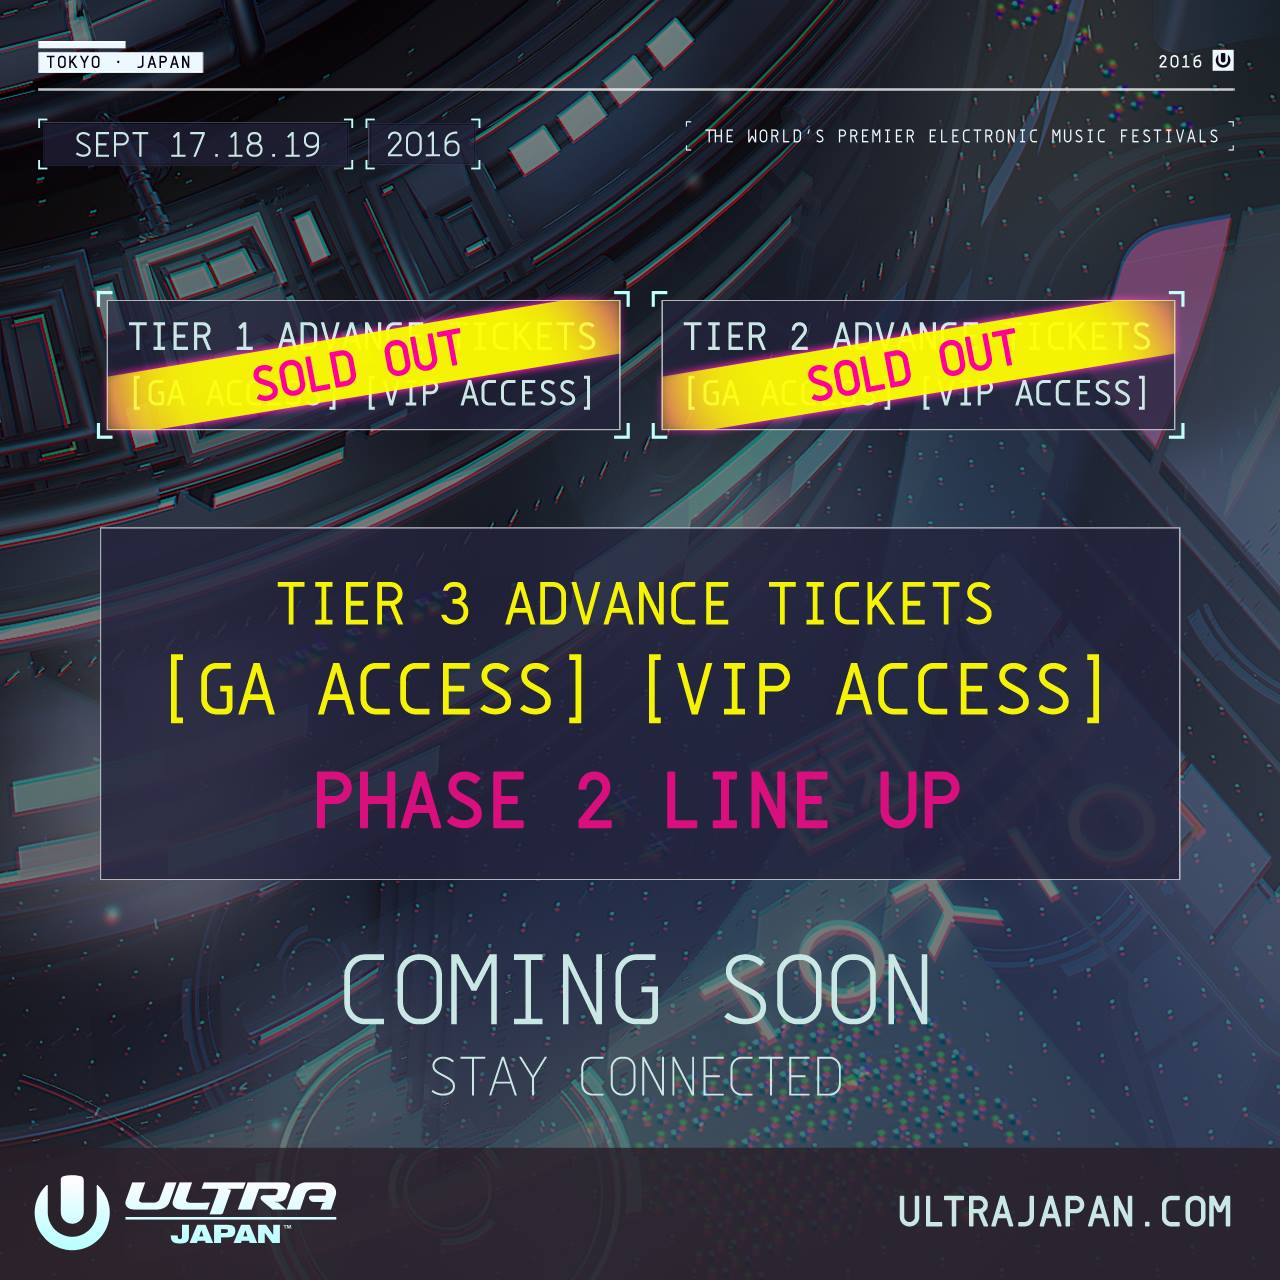 TIER 2 ADVANCE TICKETS COMPLETELY SOLD OUT!